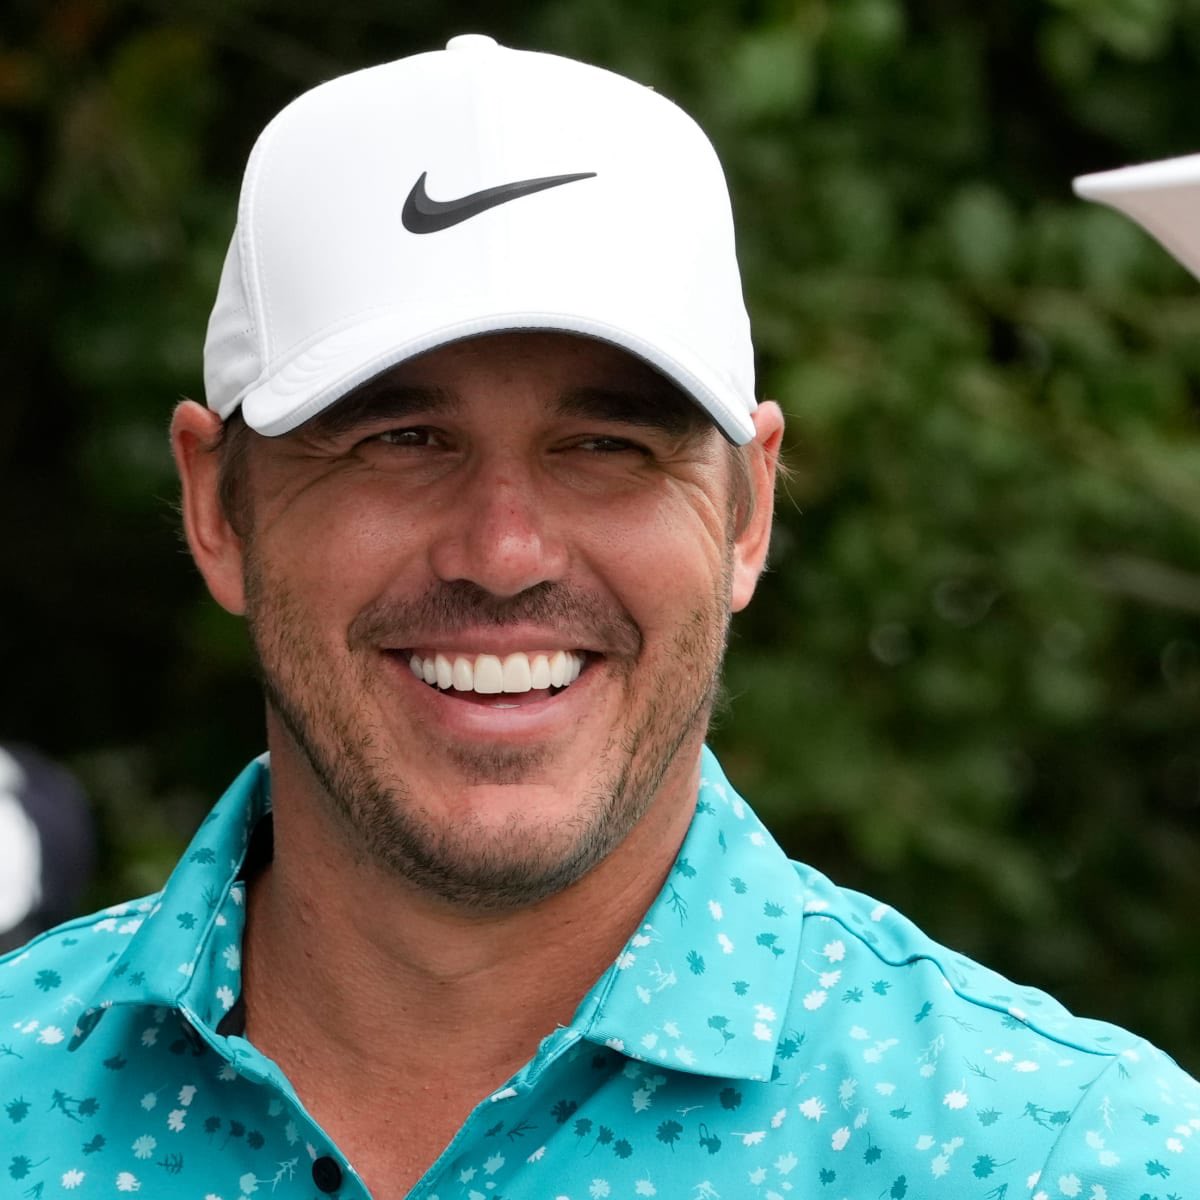 Brooks Koepka shared his thoughts on Justin Thomas missing the Playoffs saying “Yea I mean he was close but he needed to make that last shot. Unfortunately, he pulled a ‘Megan Rapinoe’ and choked.”